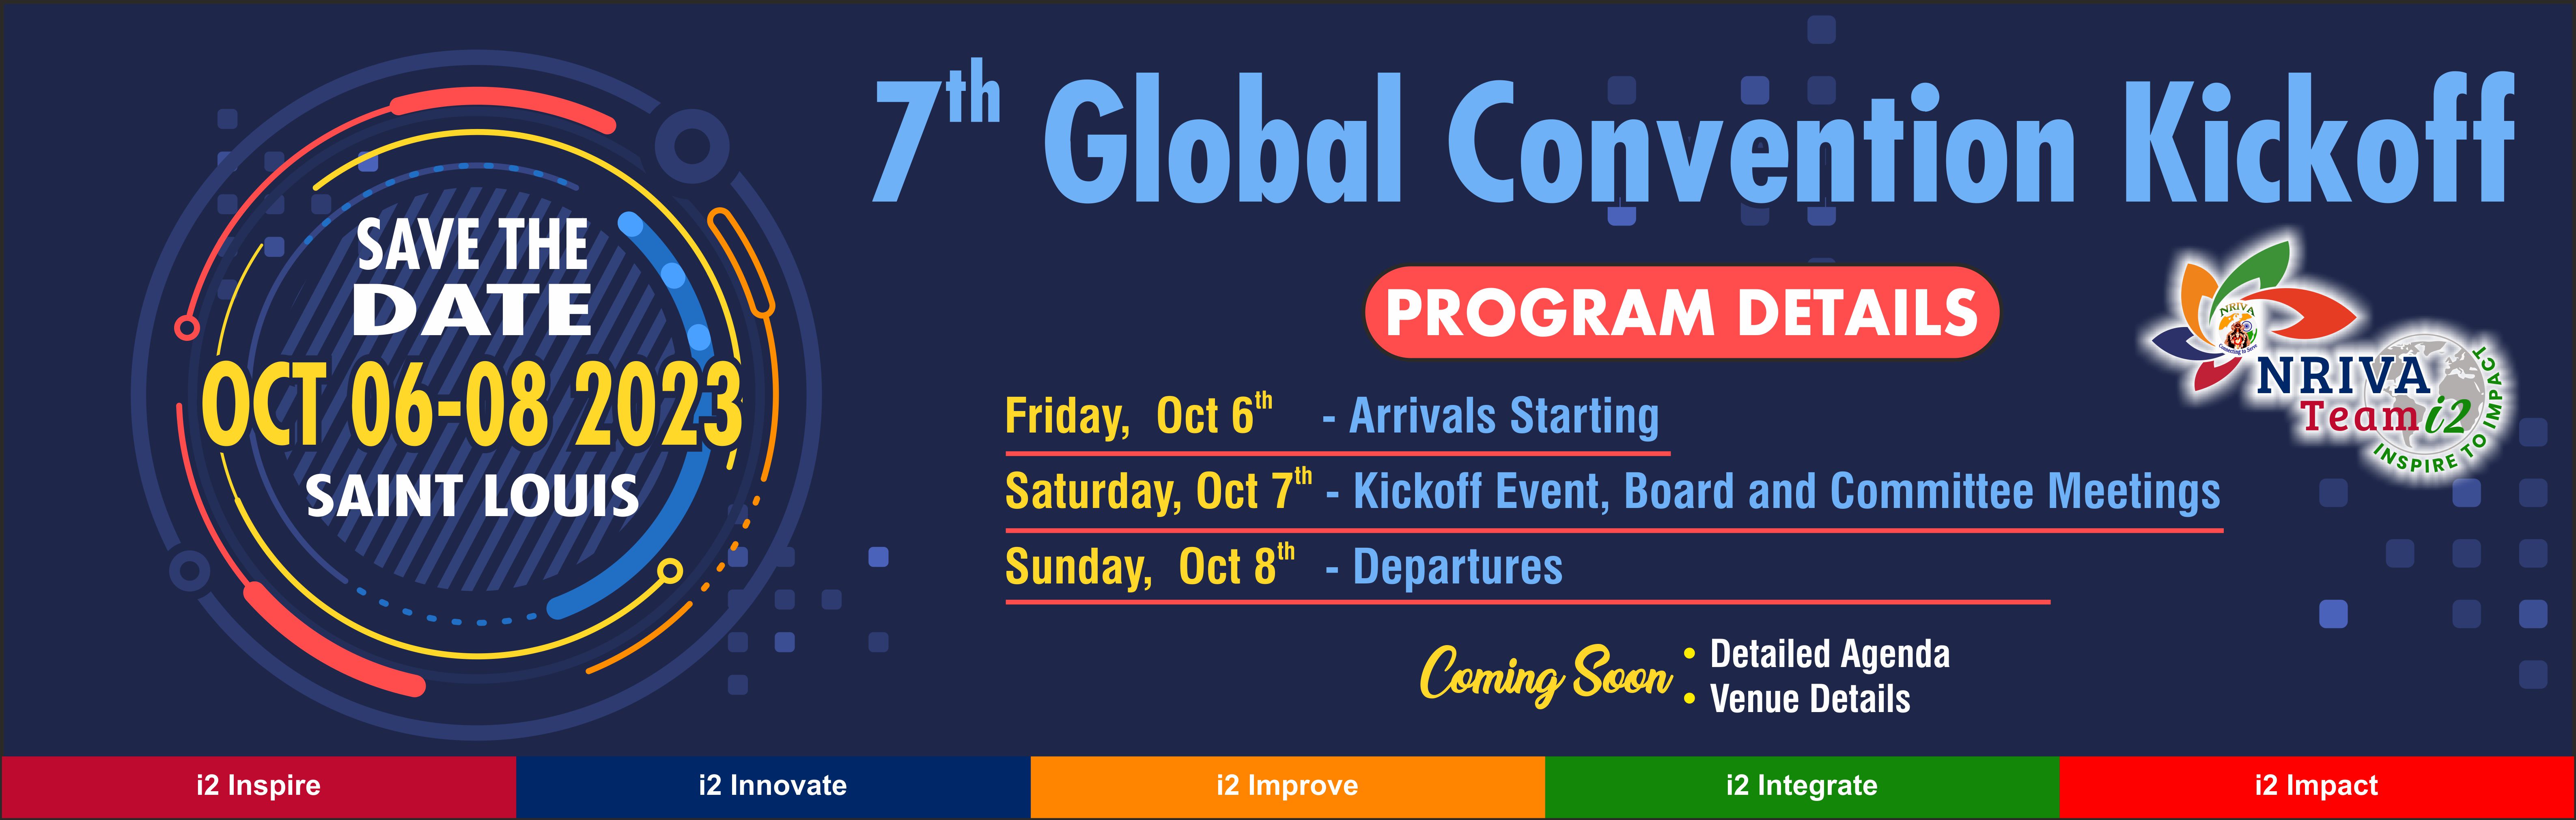 7th Global Convention Kickoff